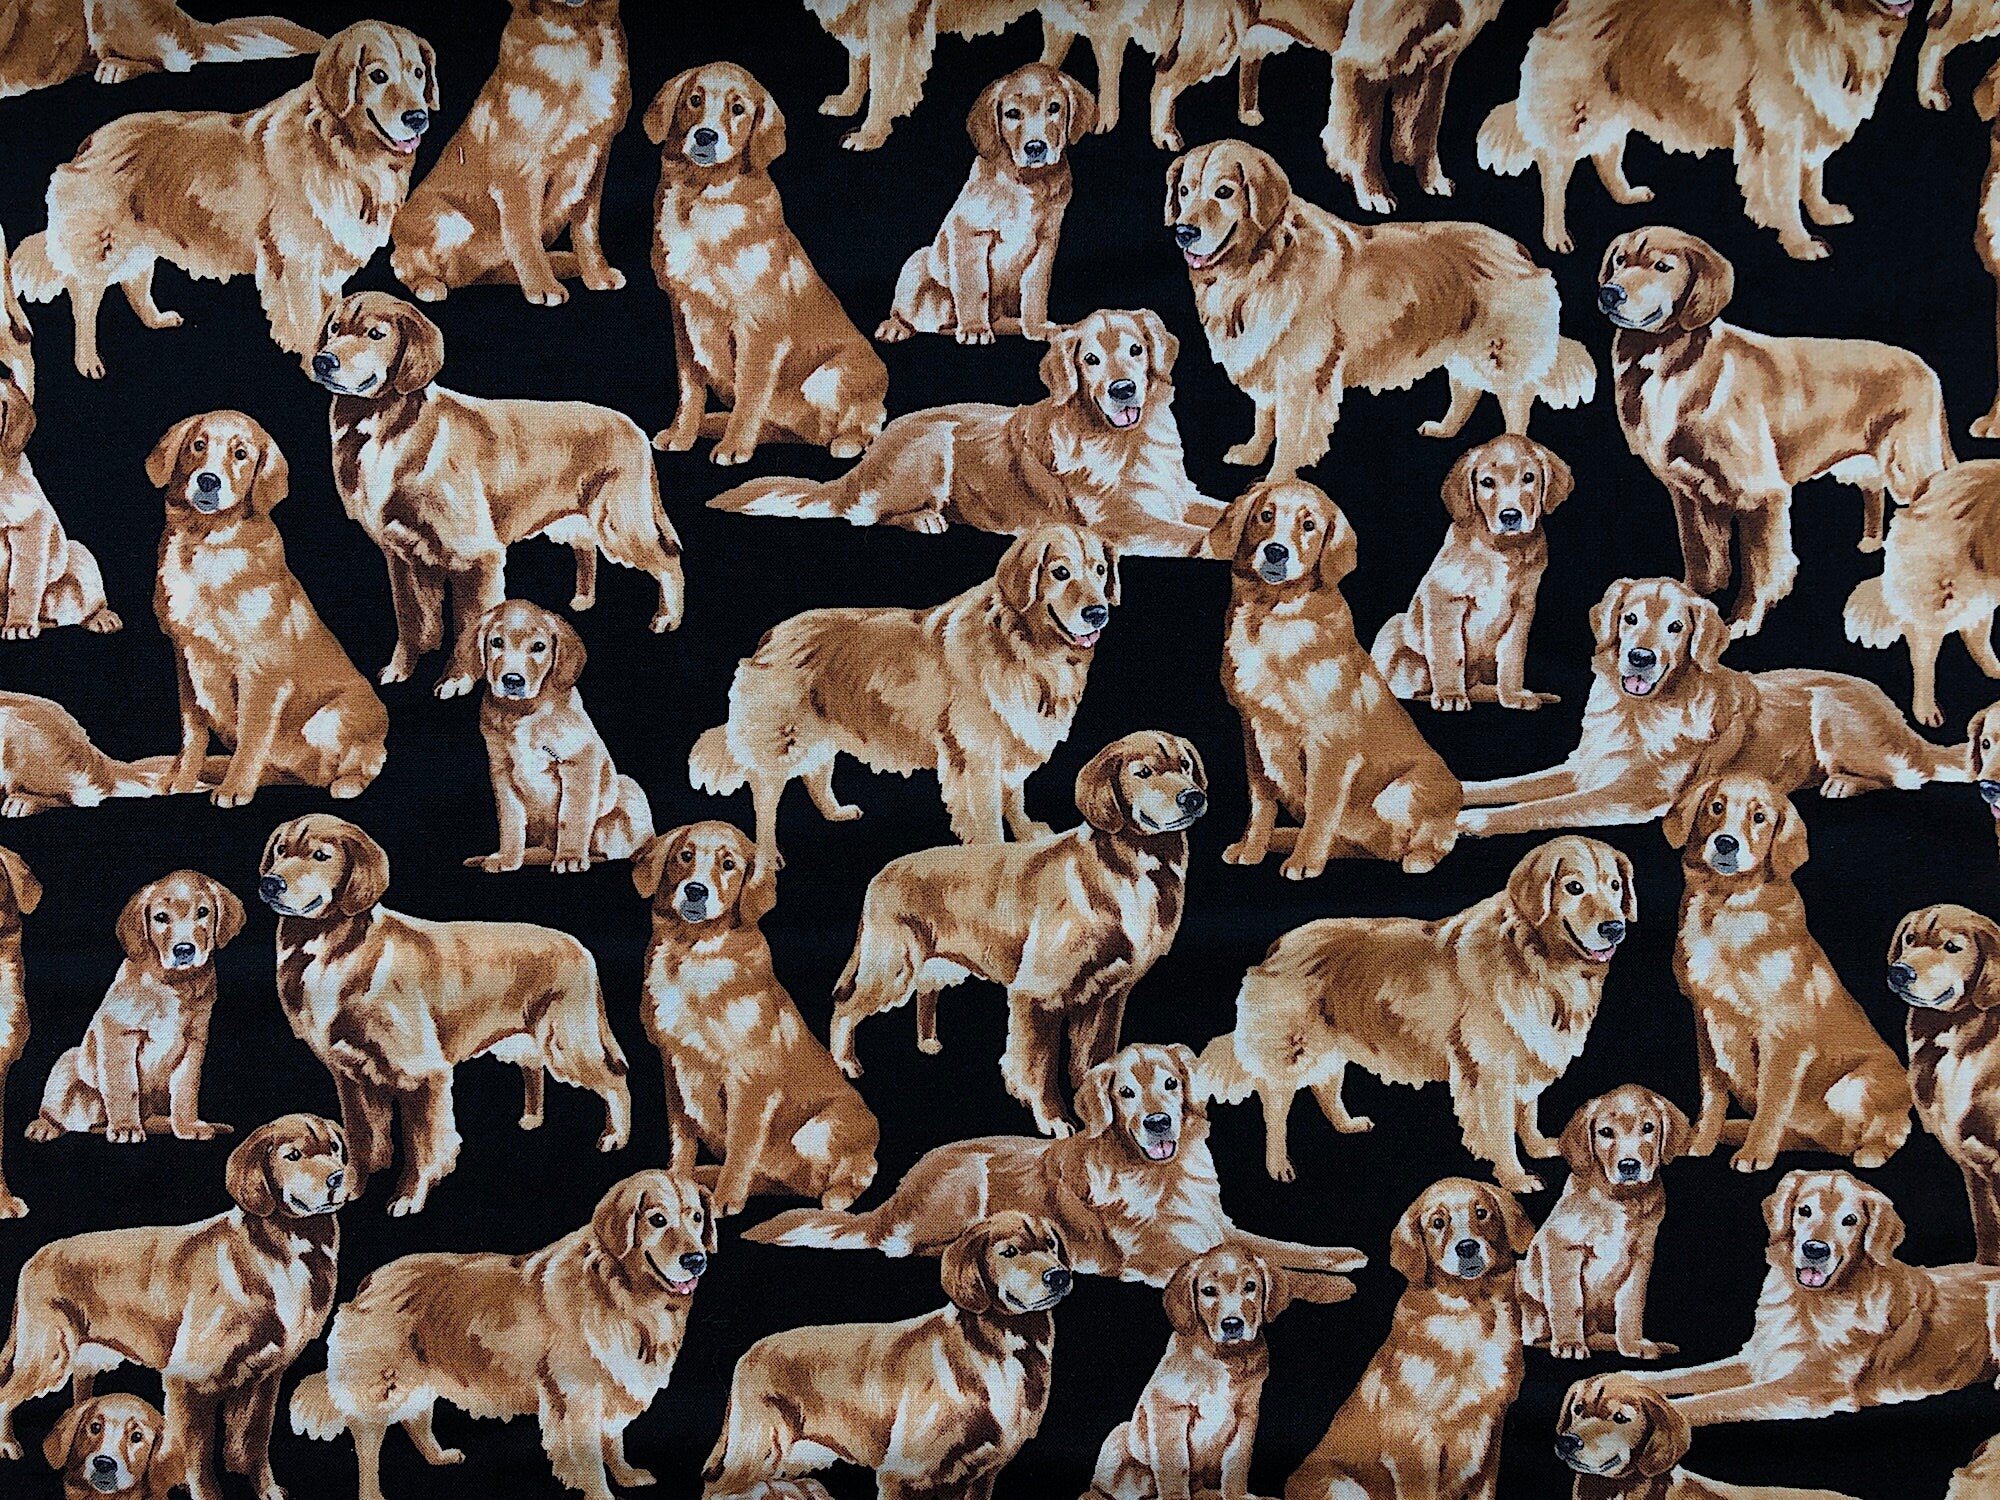 This fabric is covered with Golden Retrievers. Some are sitting, some are standing and some are laying down.